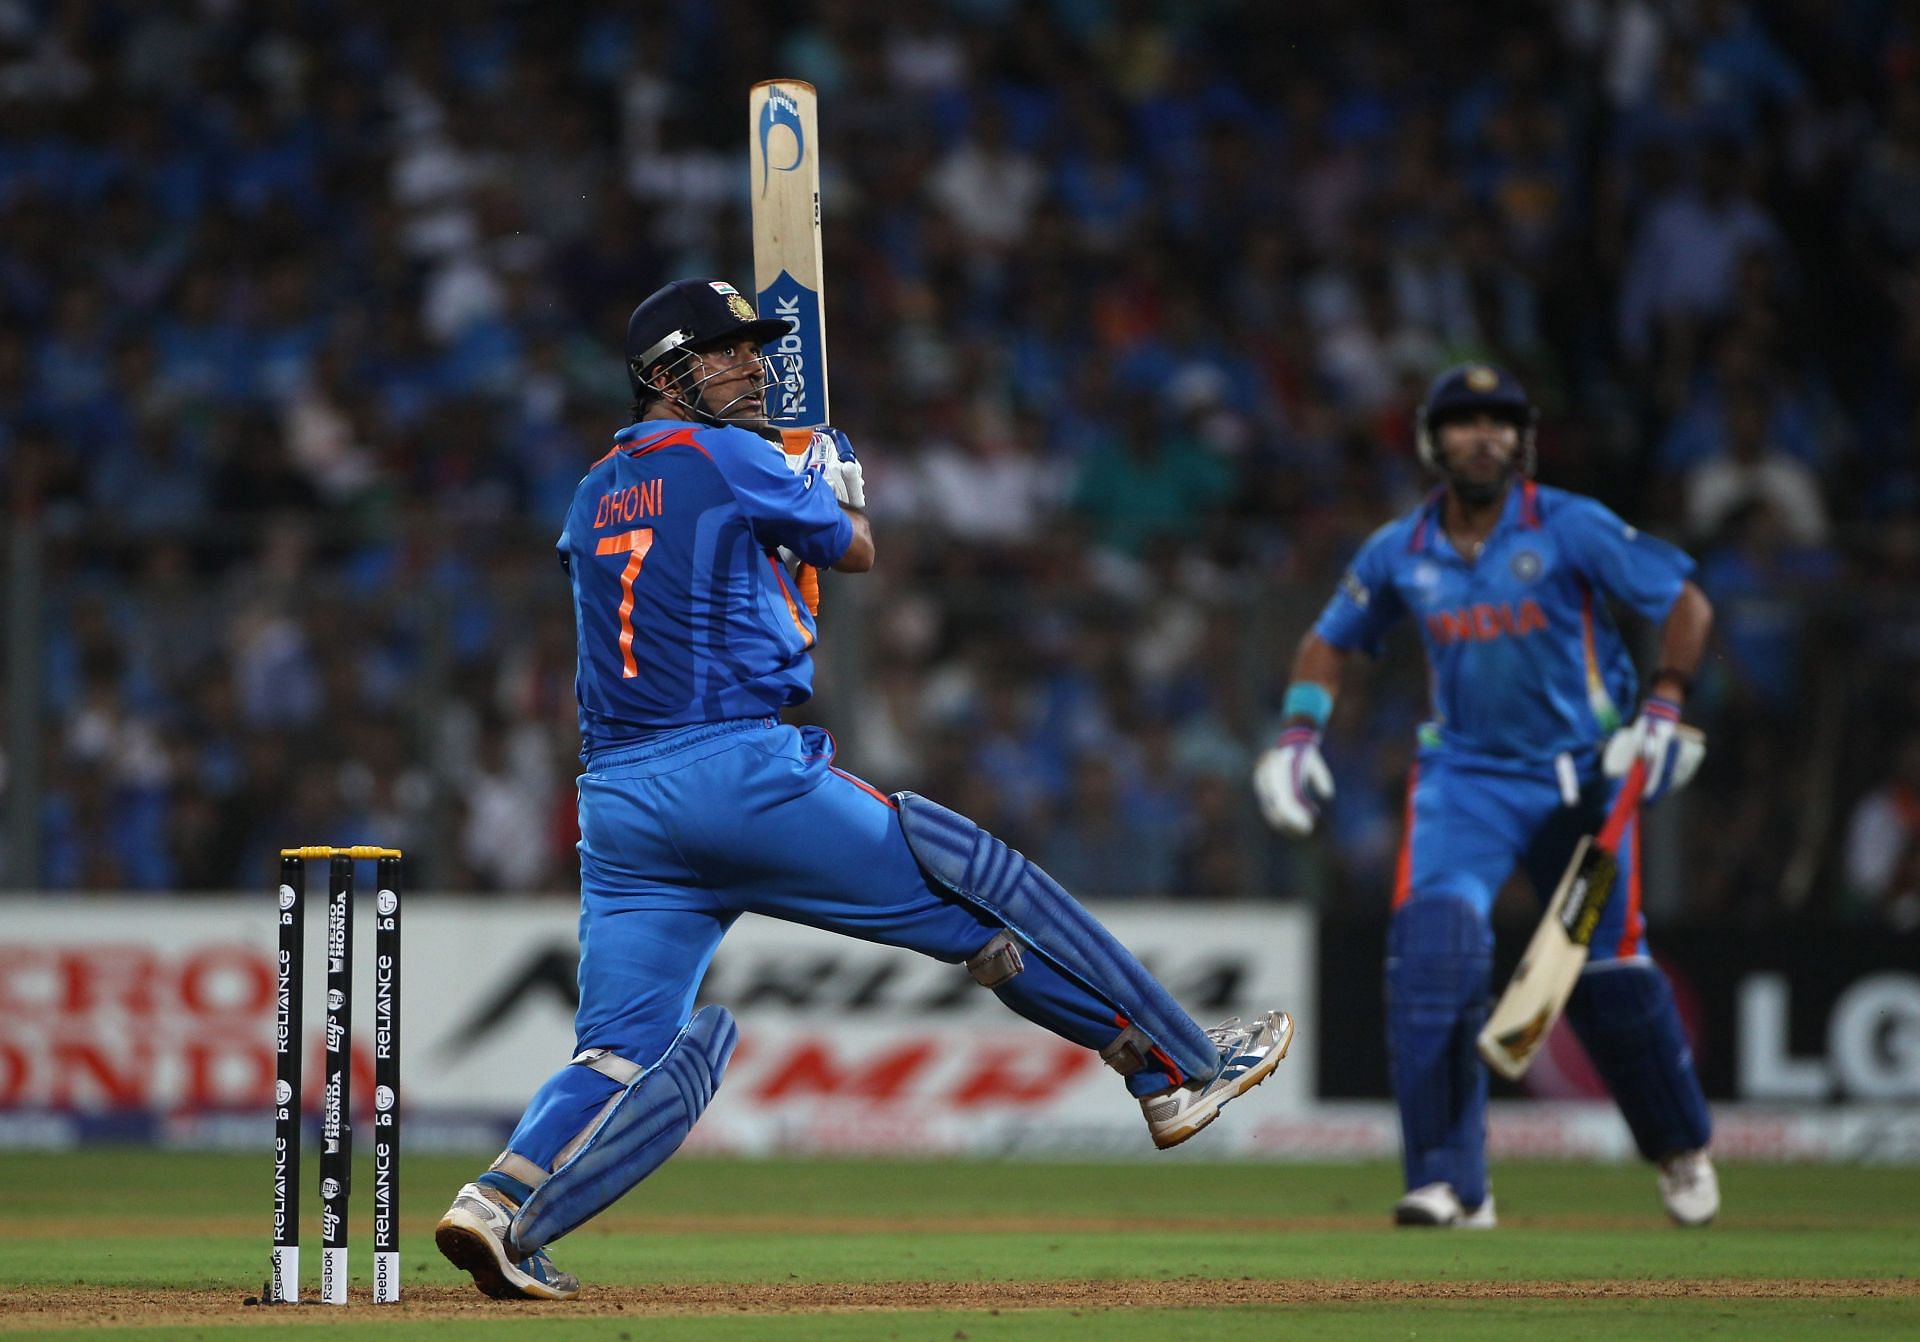 India won the World Cup under MS Dhoni in 2011. (Pic: Getty Images)